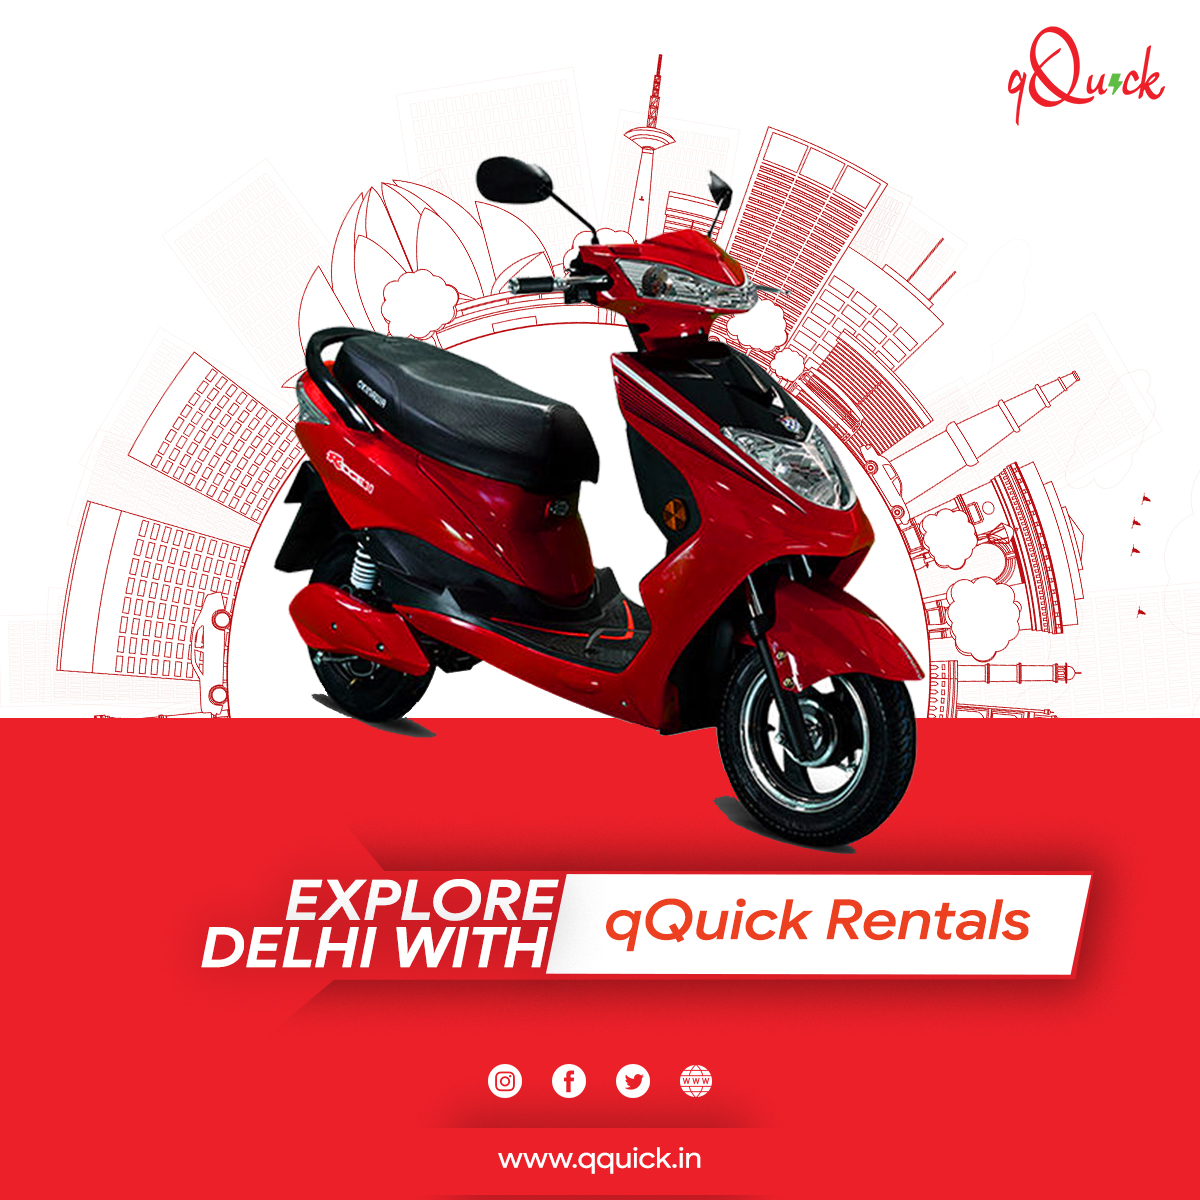 The future is in the hands of the youth!
Every ride leads to a better tomorrow. 
So keep riding 🛵 .
.
.
.
.
#qQuick #delhi #scooty #publicbikesharing #scooterstation #pollution #cleandelhi #electric #delhi #delhite #delhihai #delhidays #delhincr #electricscooter